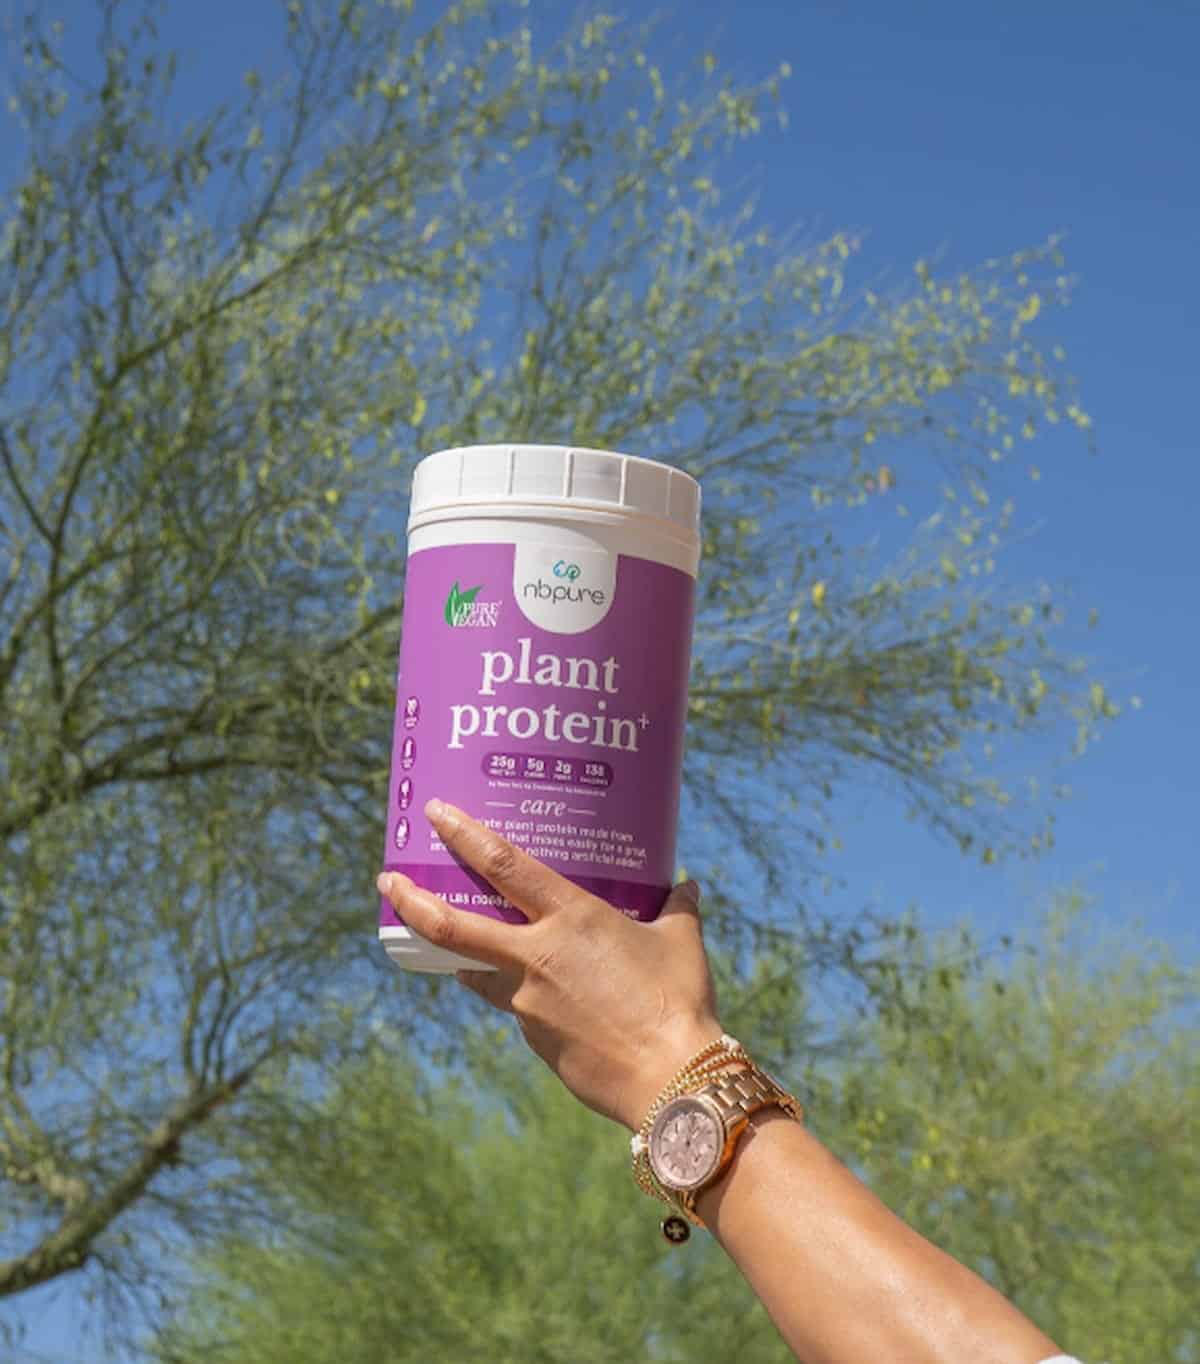 A hand holding up a package of NB Pure's plant protein.